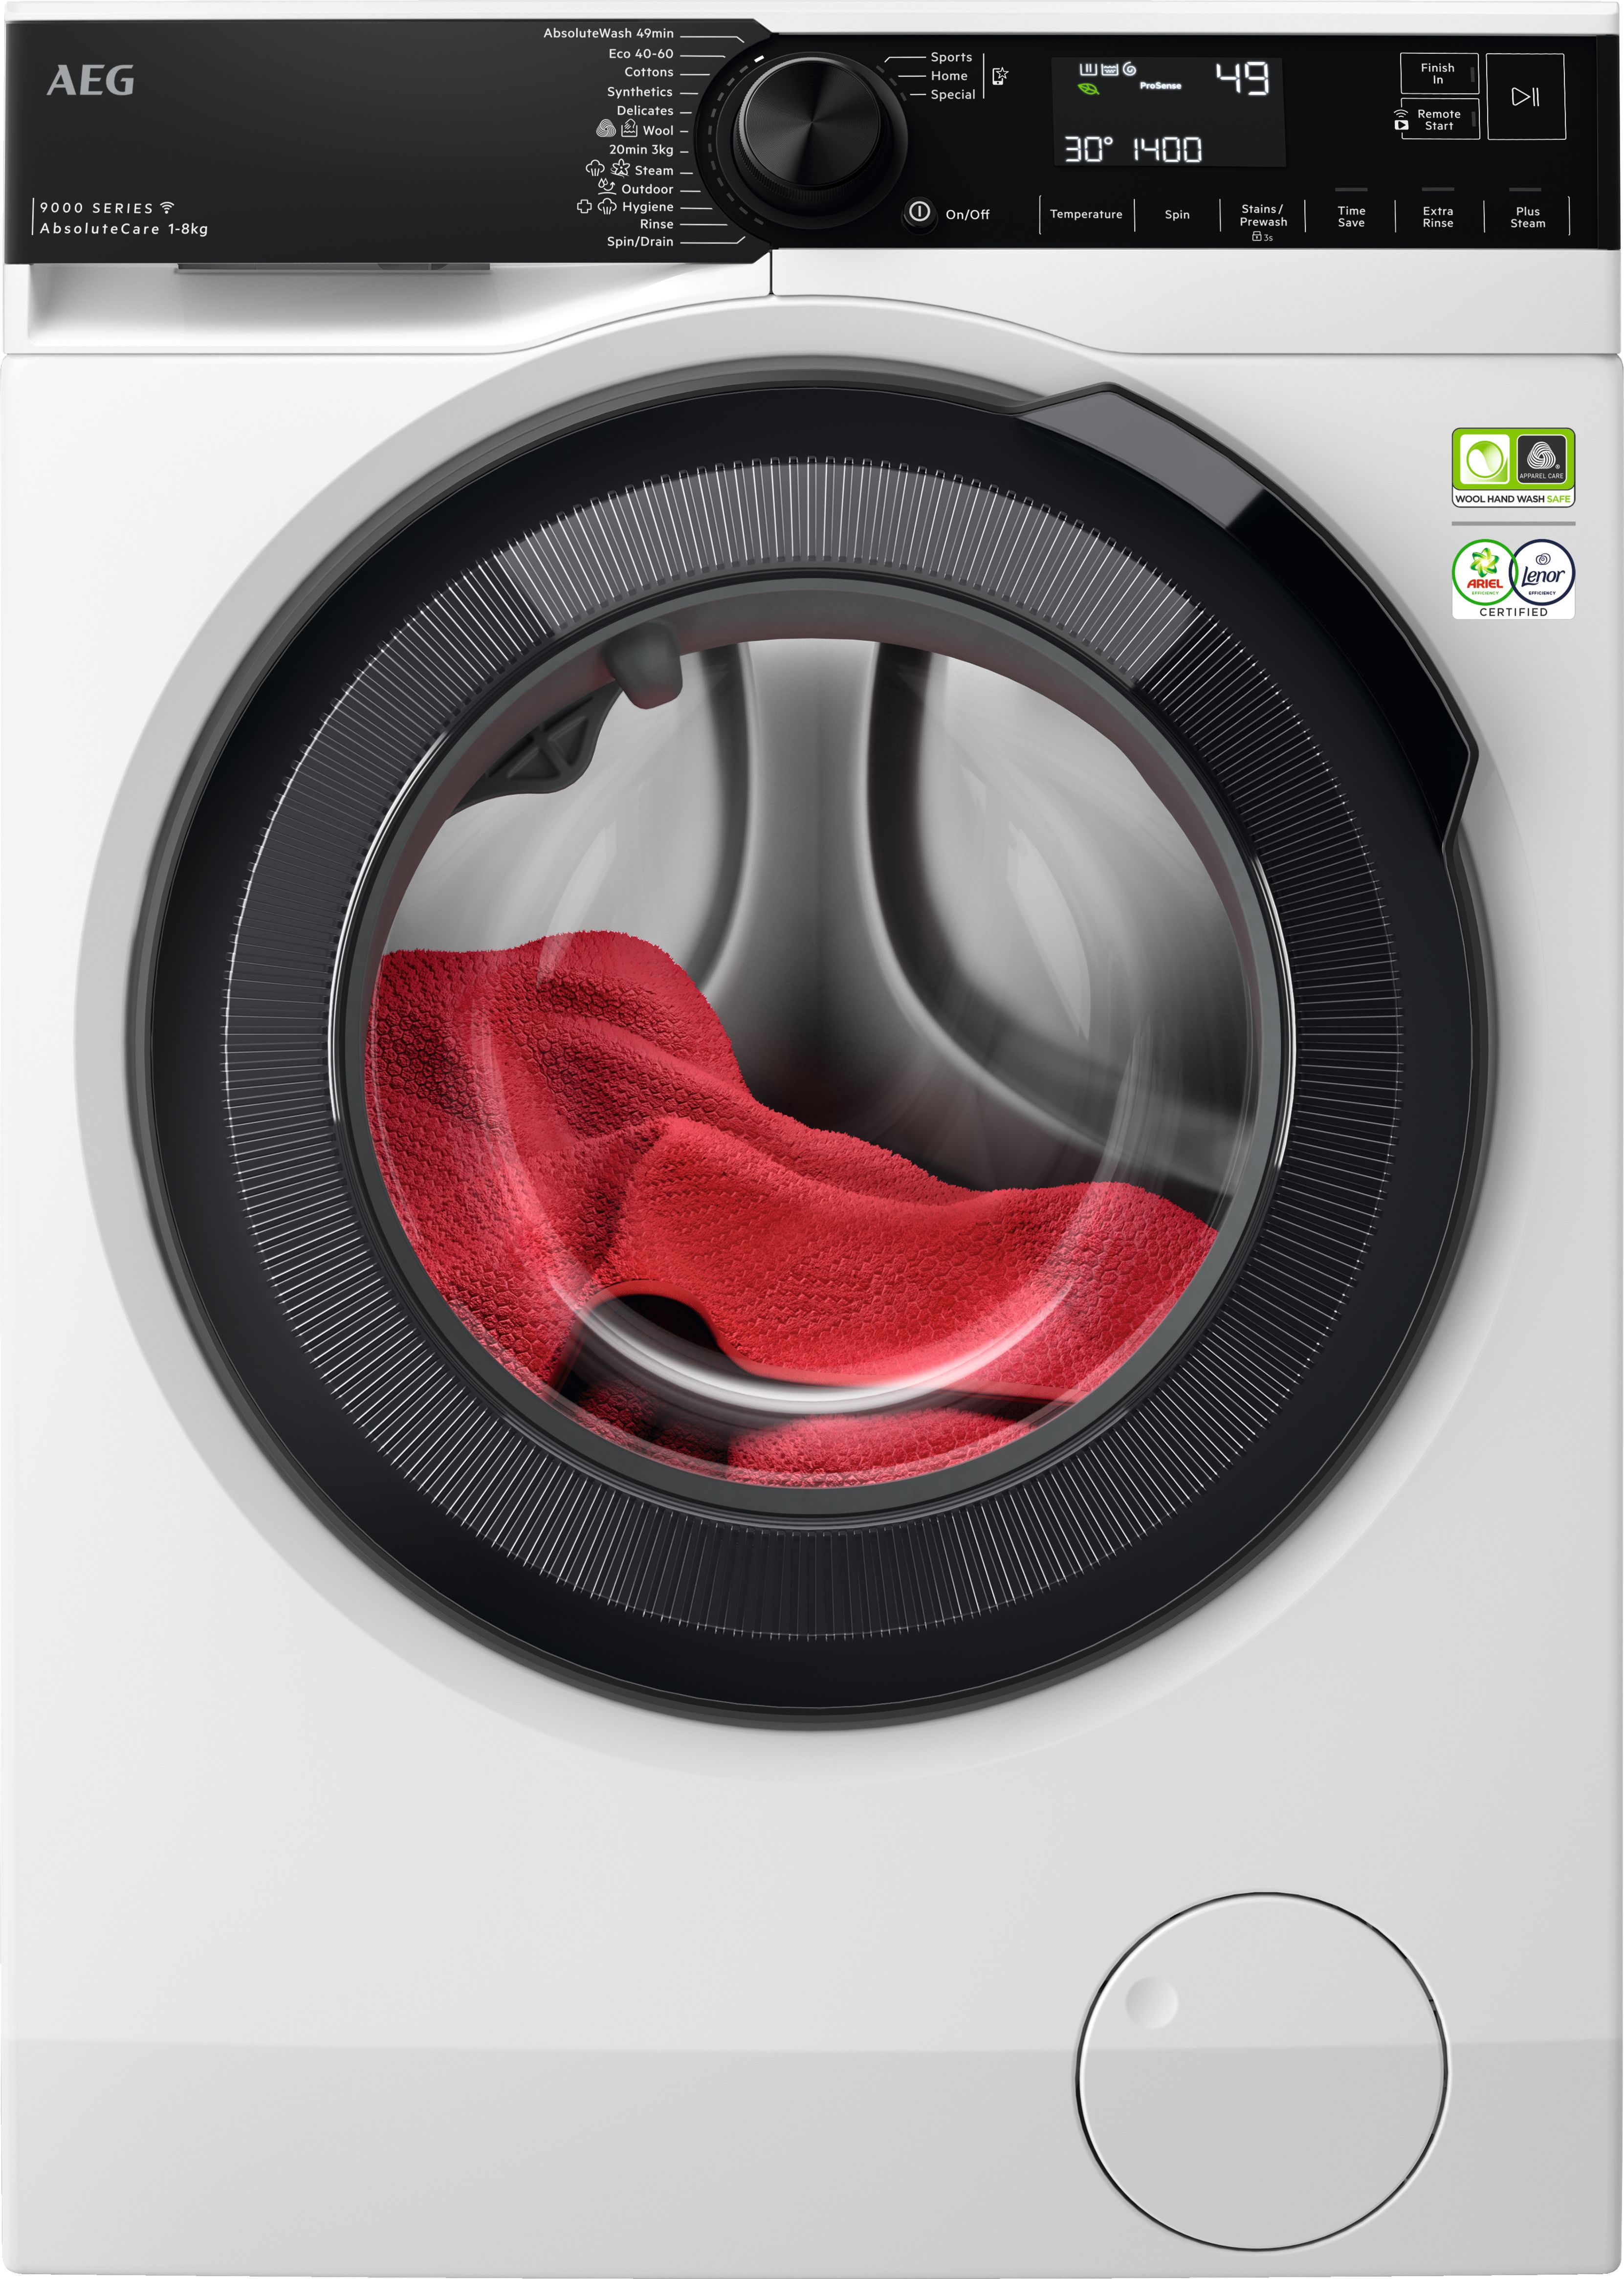 AEG LFR94846WS 8kg Washing Machine with 1400 rpm - White - A Rated, White